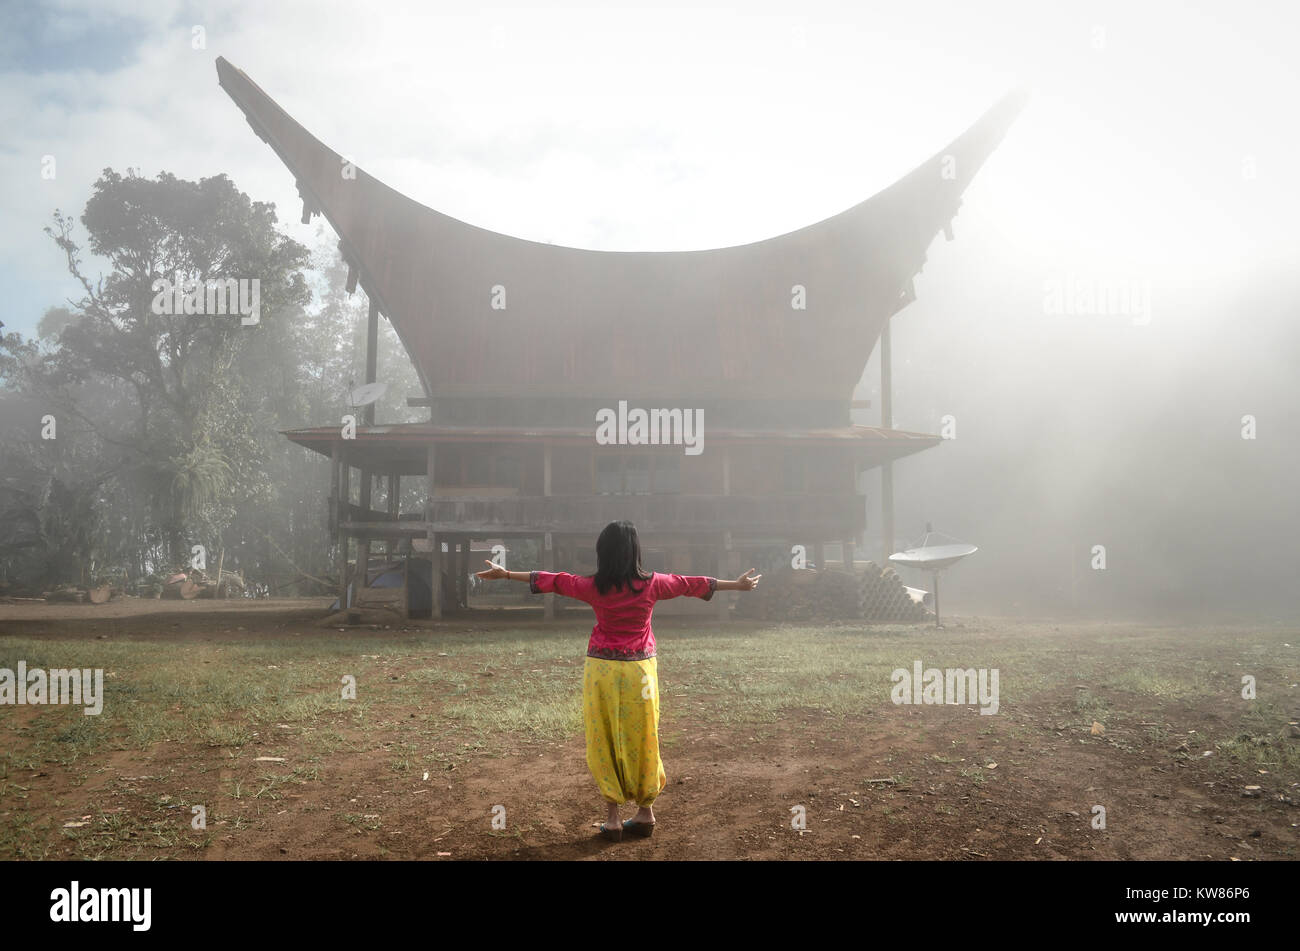 A woman standing in front of the Tongkonan house in Lolai. Lolai often known as 'Land Above the Cloud' or Negeri di Atas Awan in Banasa Indonesia. Stock Photo